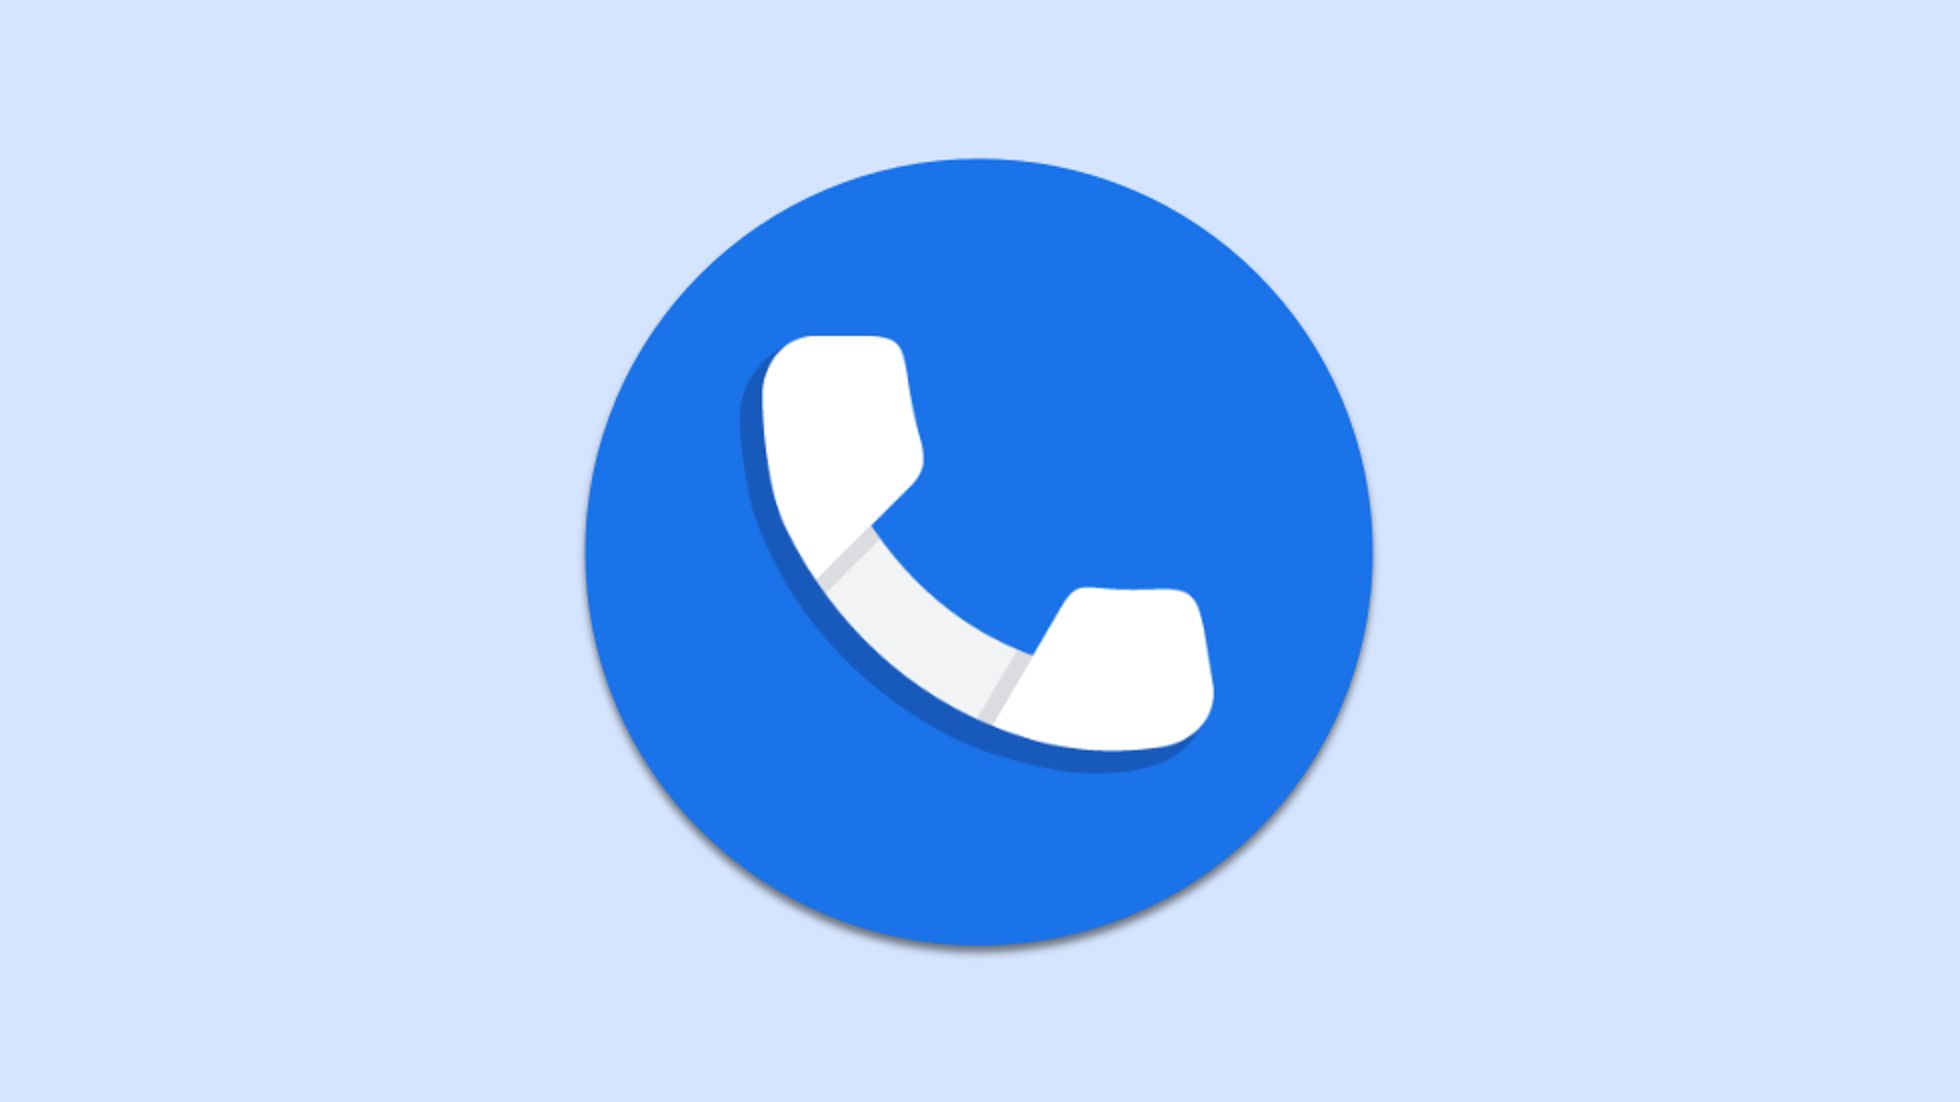 How To Ensure Your Calls Display as “Verified Calls” with Carriers